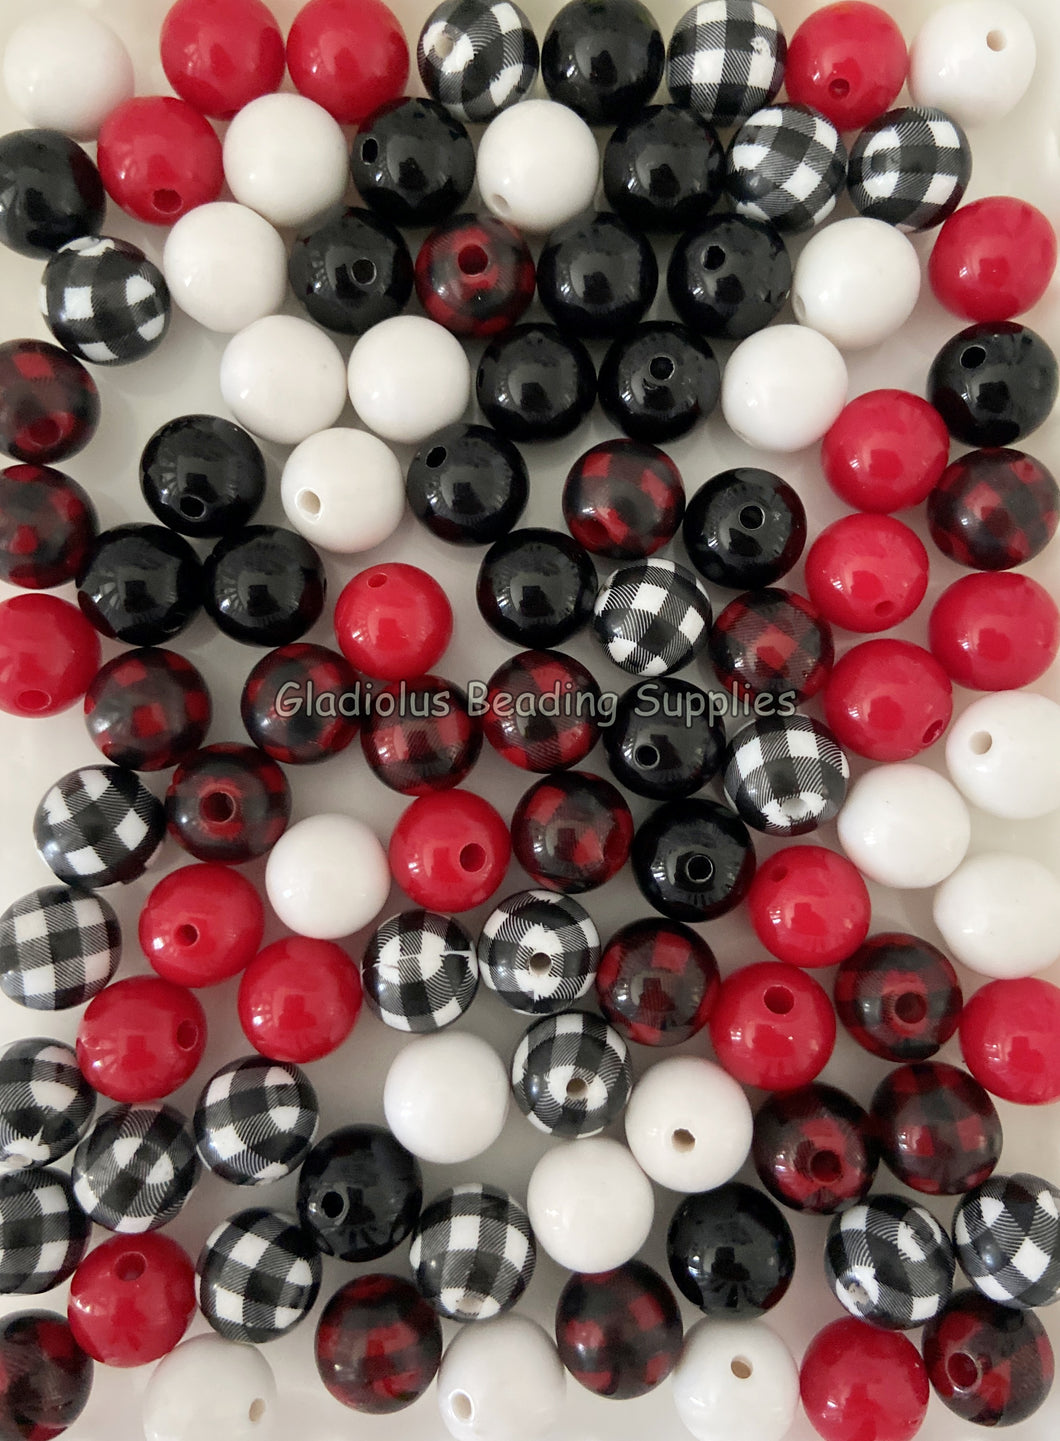 100qty 12mm Plaid Mixed Beads - Acrylic Solid Beads - Bubblegum Beads - Chunky Beads